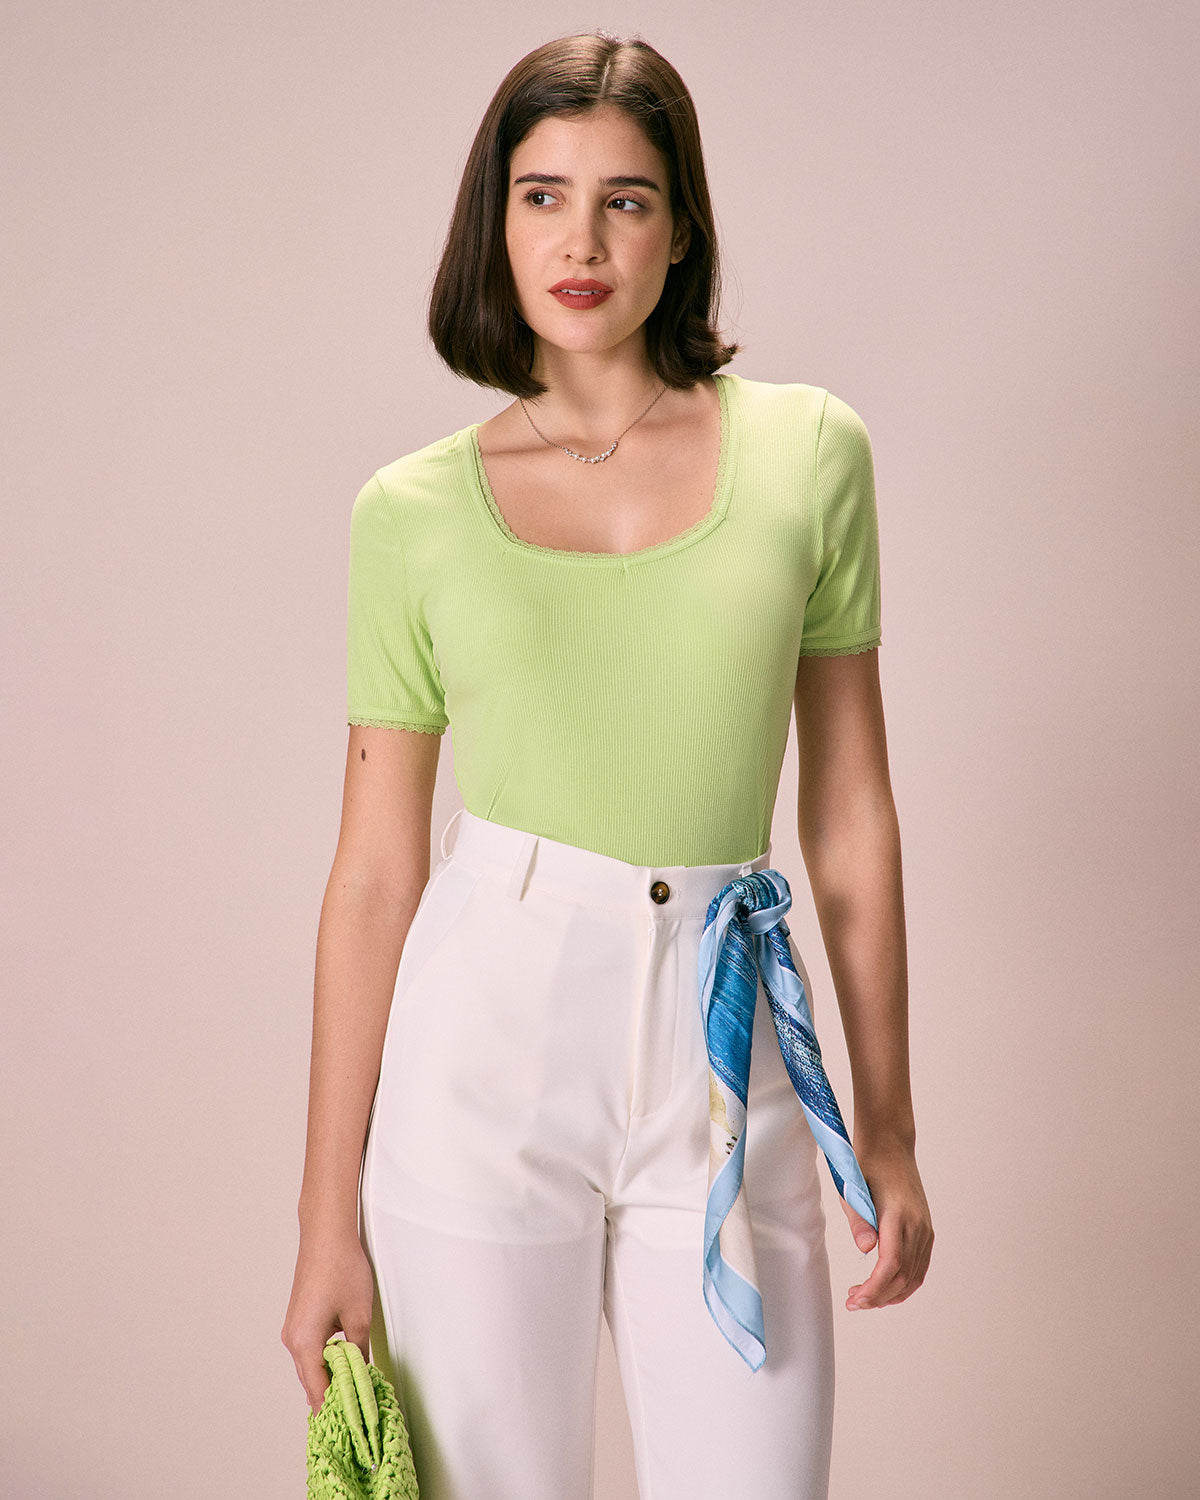 The Green Lace Trim Knit Tee Green Tops - RIHOAS